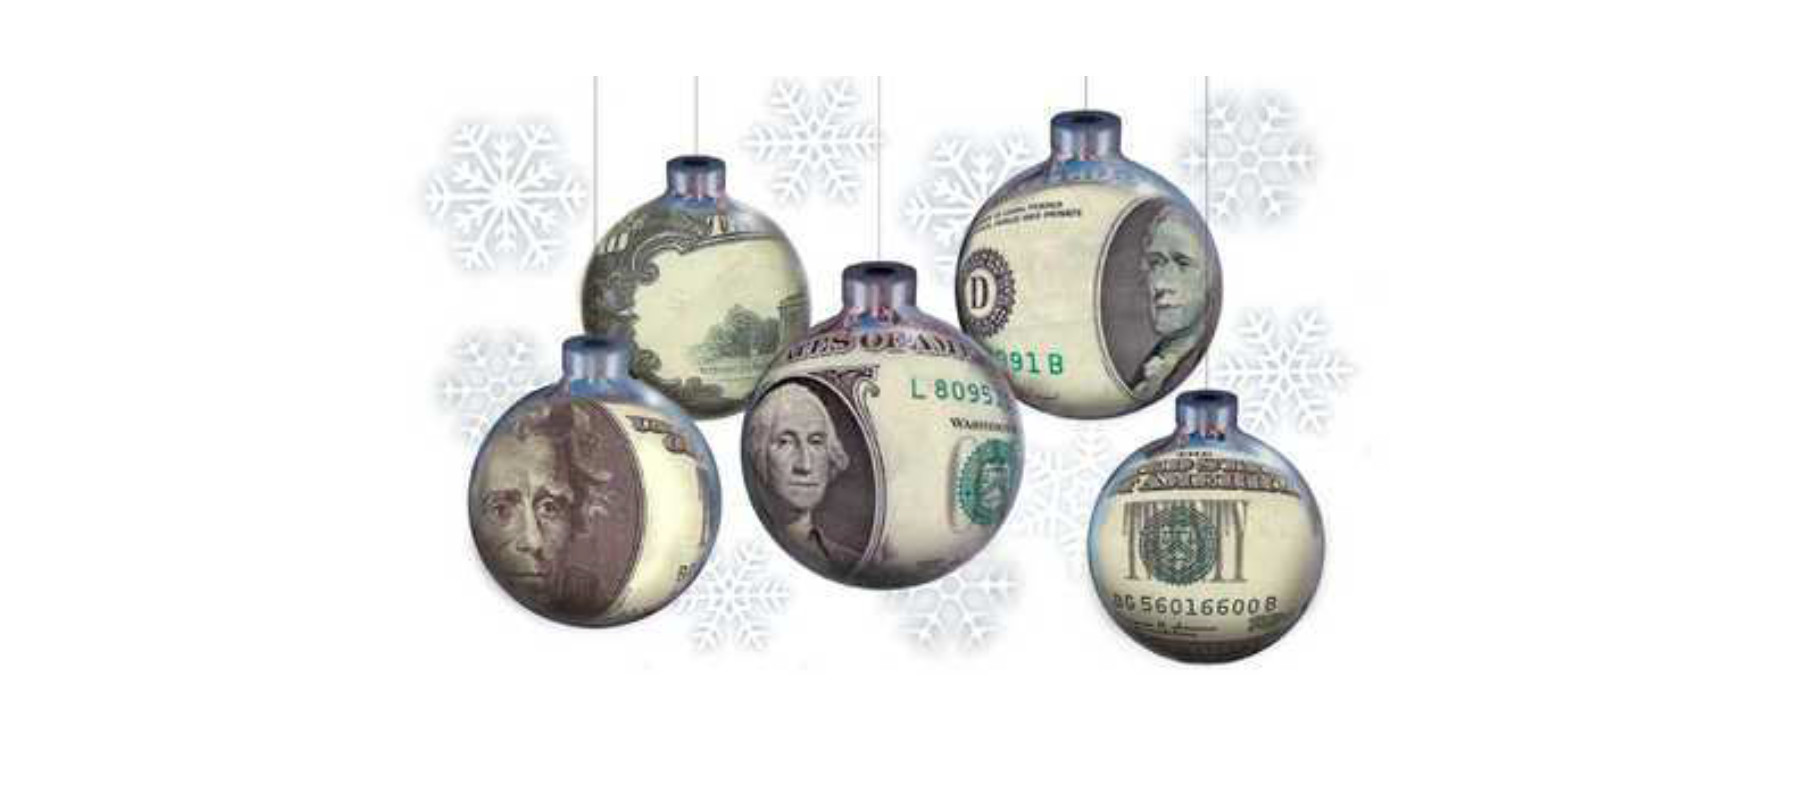 Christmas tree ornaments with money inside them.